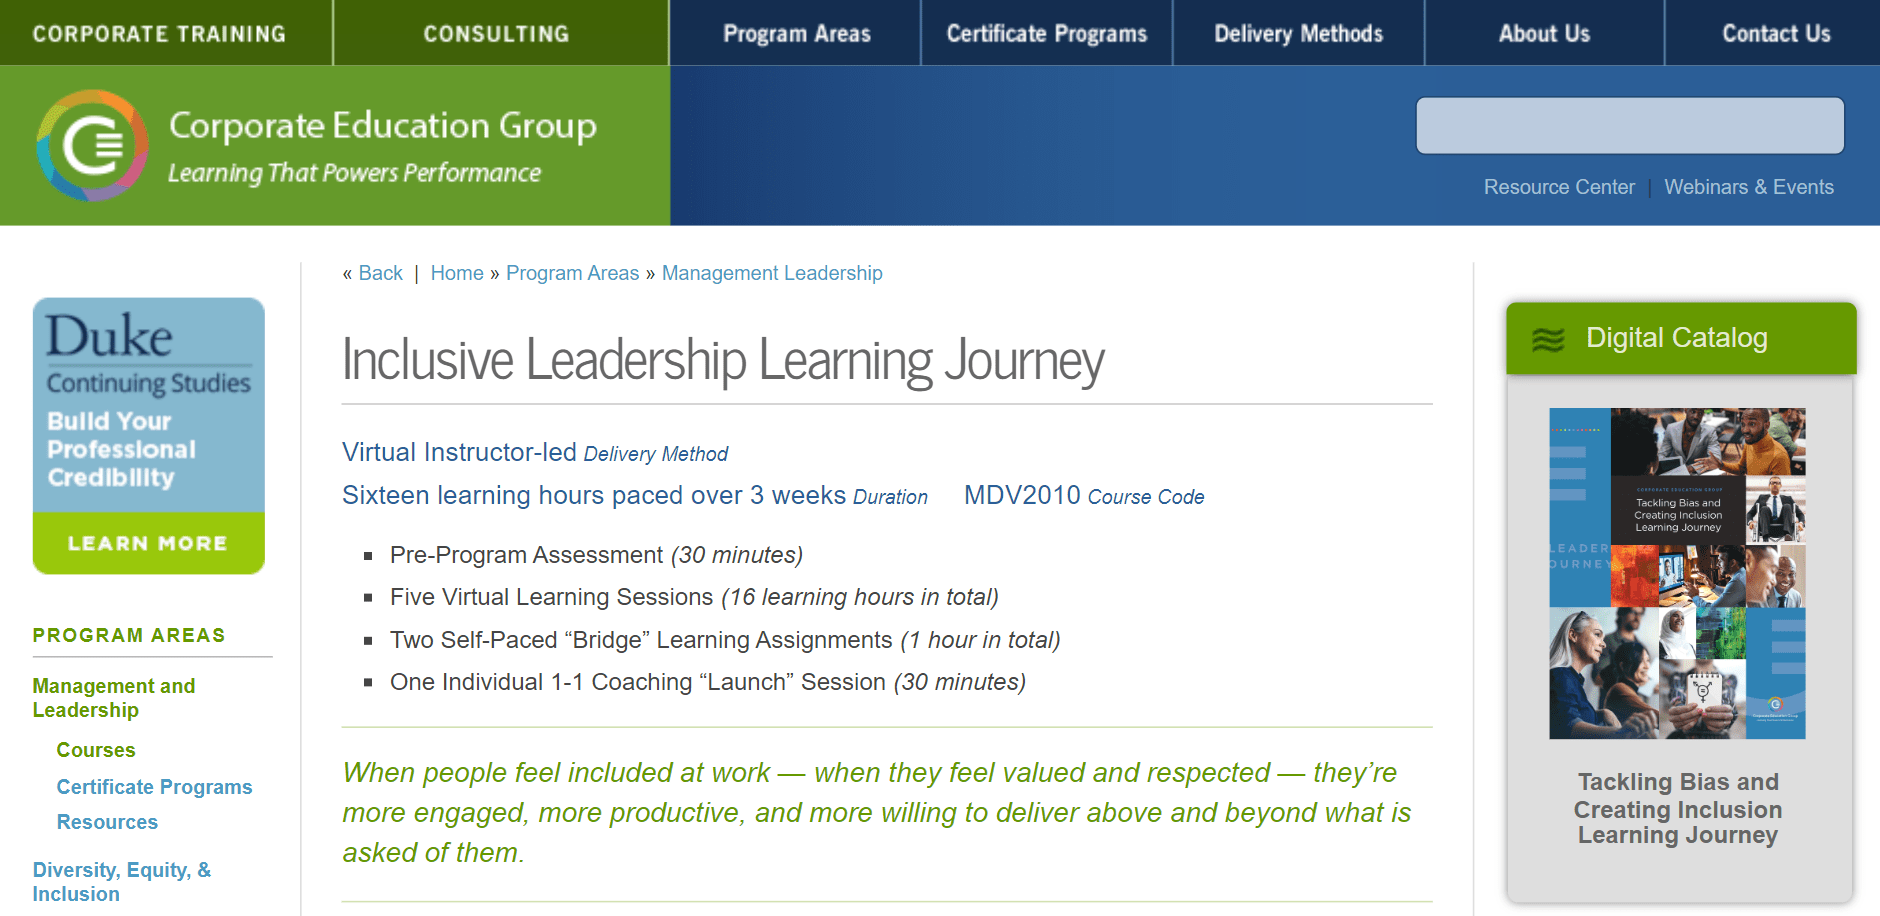 Inclusive Leadership Learning Journey by Corporate Education Group